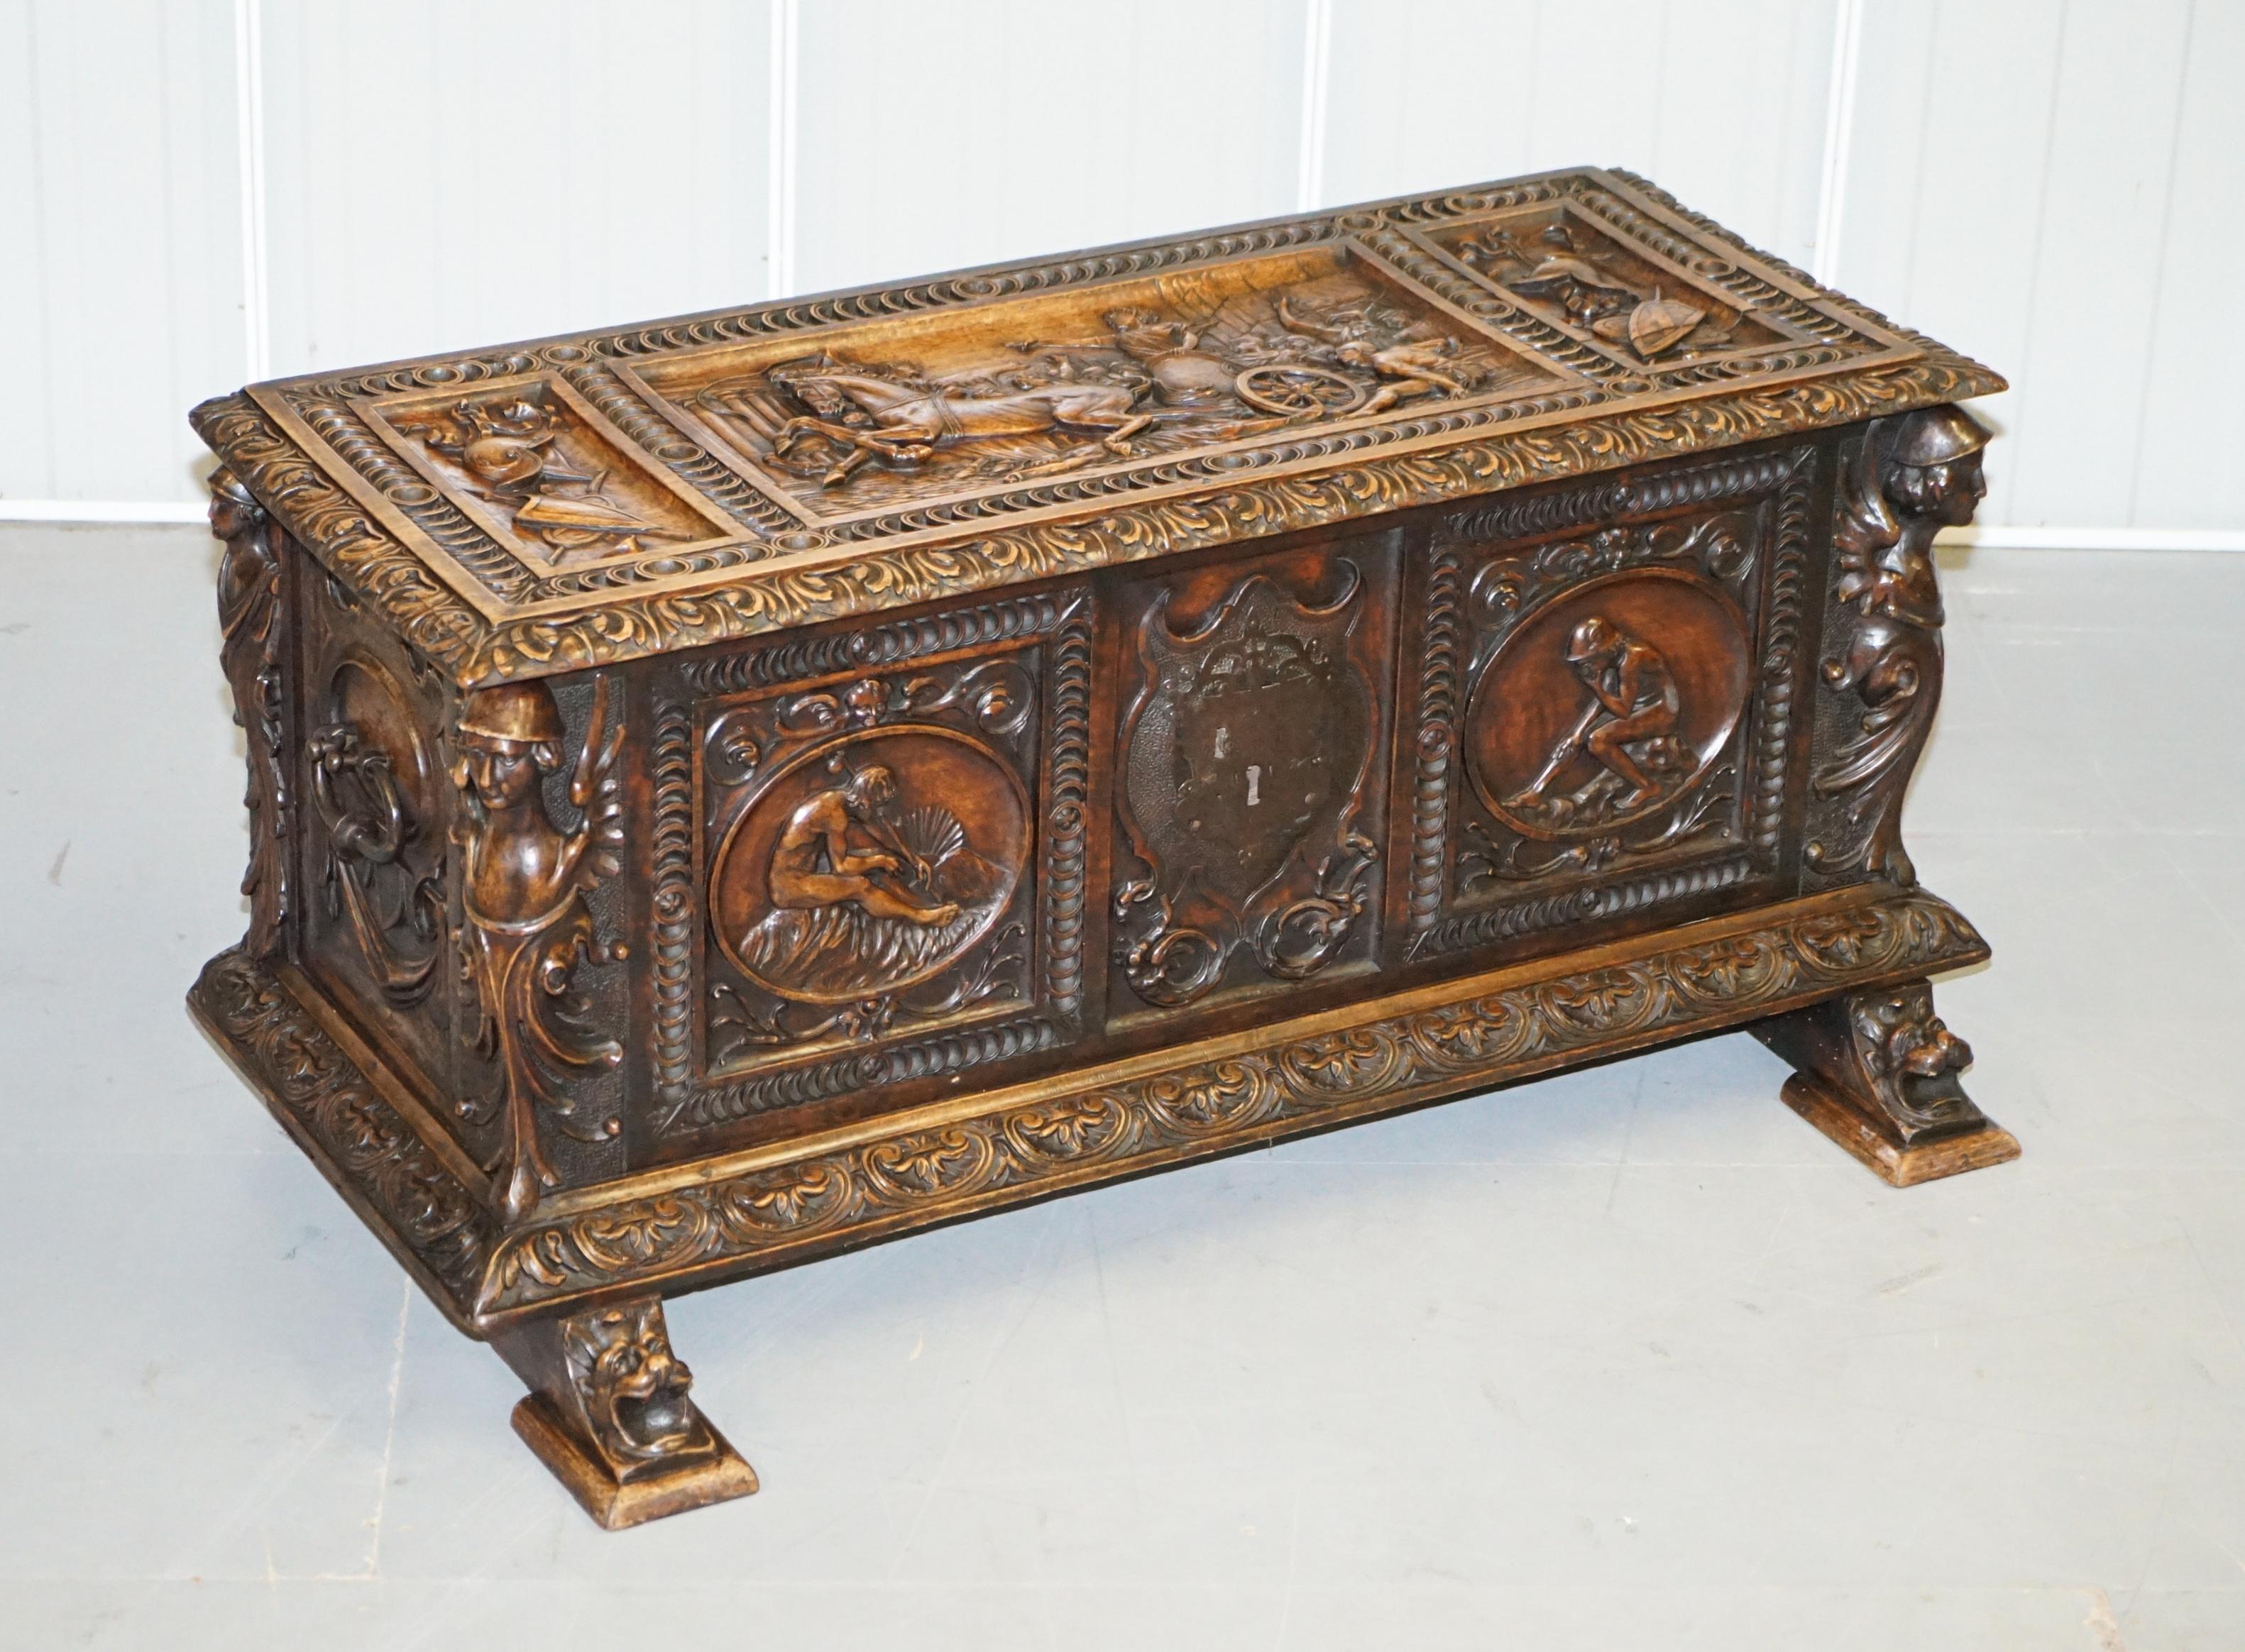 We are delighted to offer for sale this absolutely exquisite Antique hand carved solid walnut trunk or coffer with Roman scenes 

This is pure Italian art furniture from every angle, the detail is never ending and it looks exquisite from top to